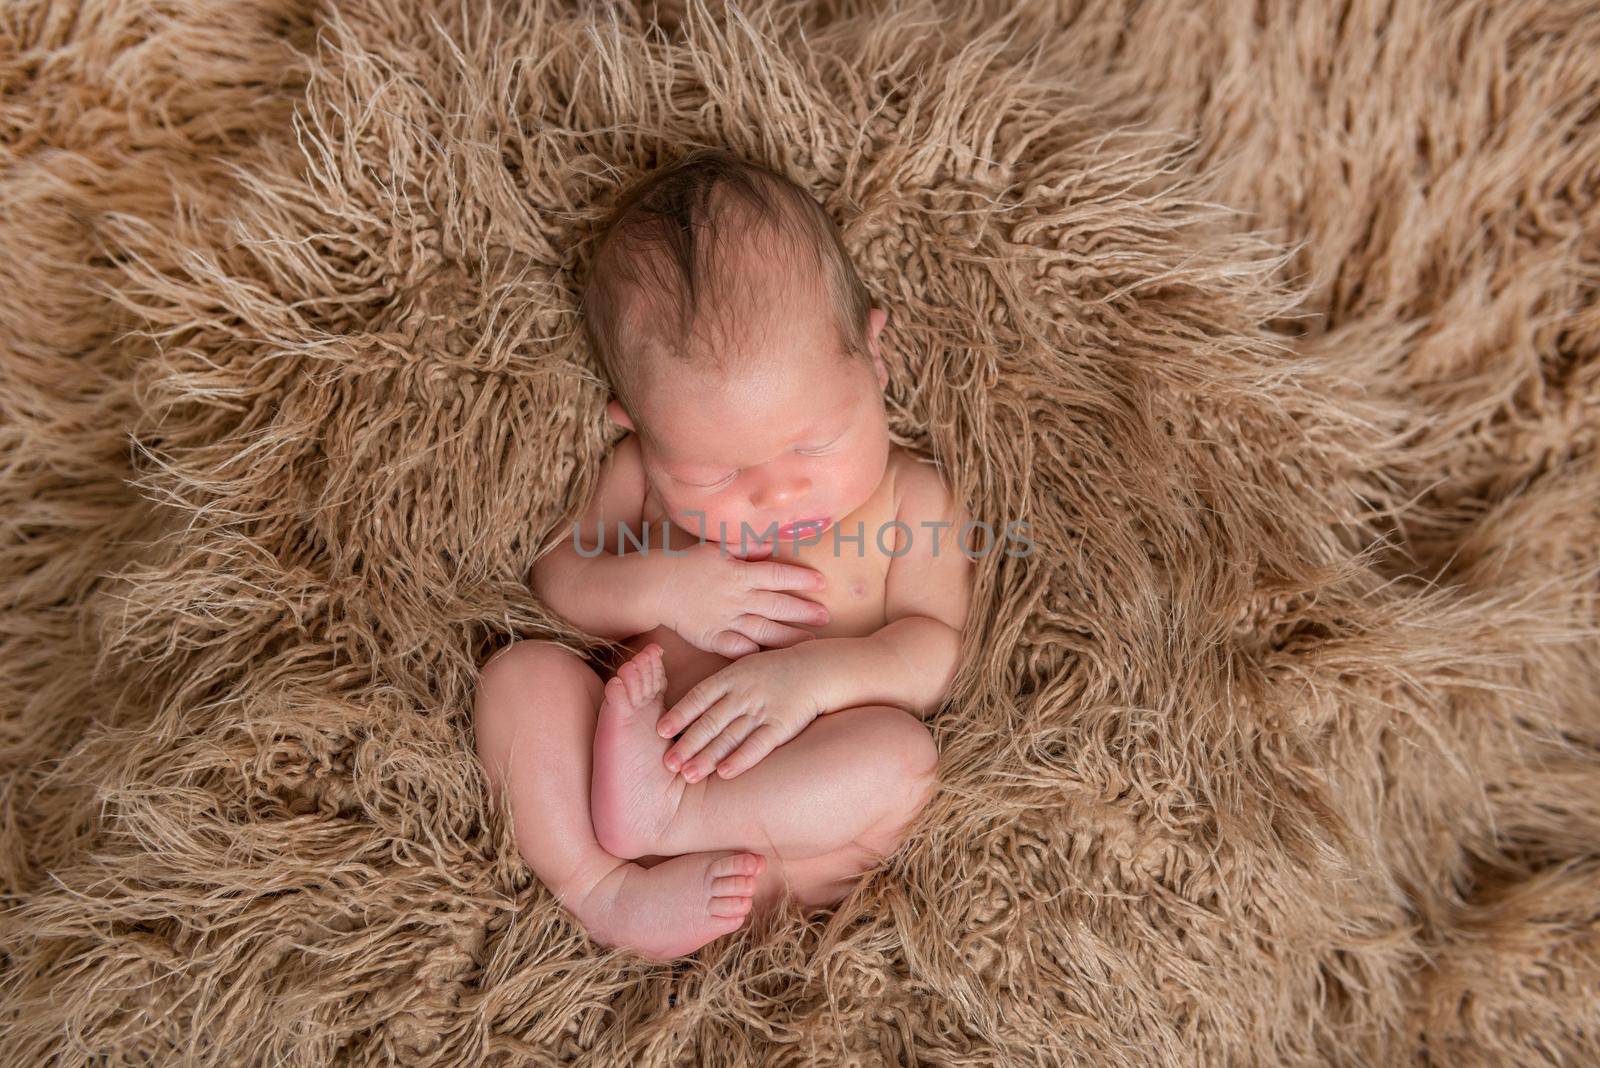 Naked baby sleeping on a pillow, topview by tan4ikk1